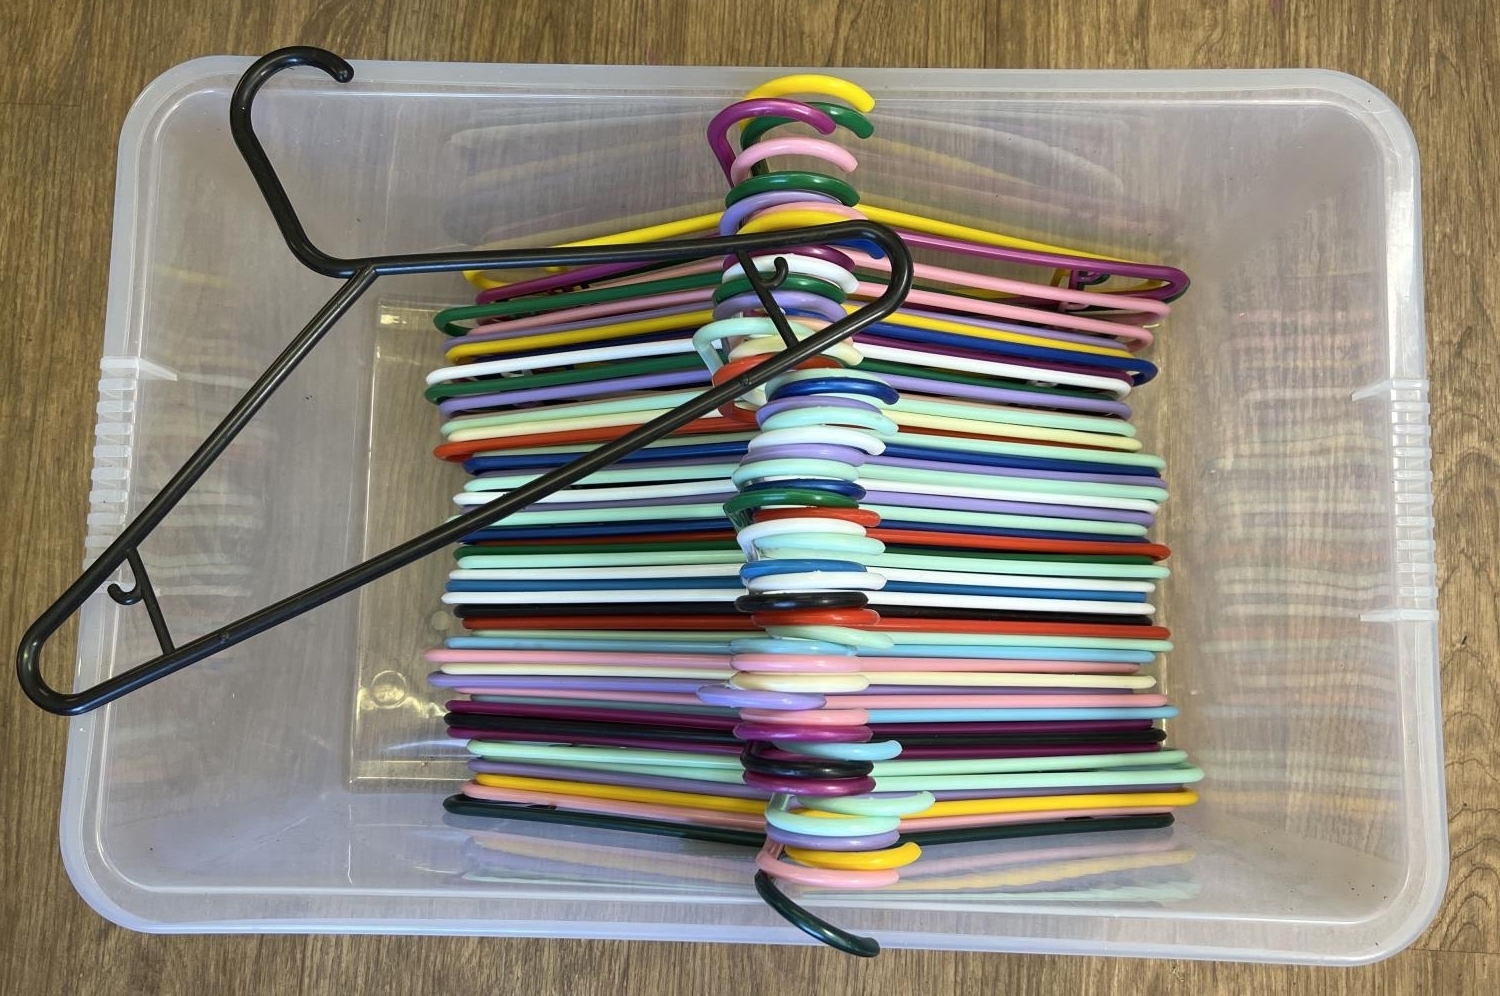 A box of 50 coloured plastic coat hangers of the same design.